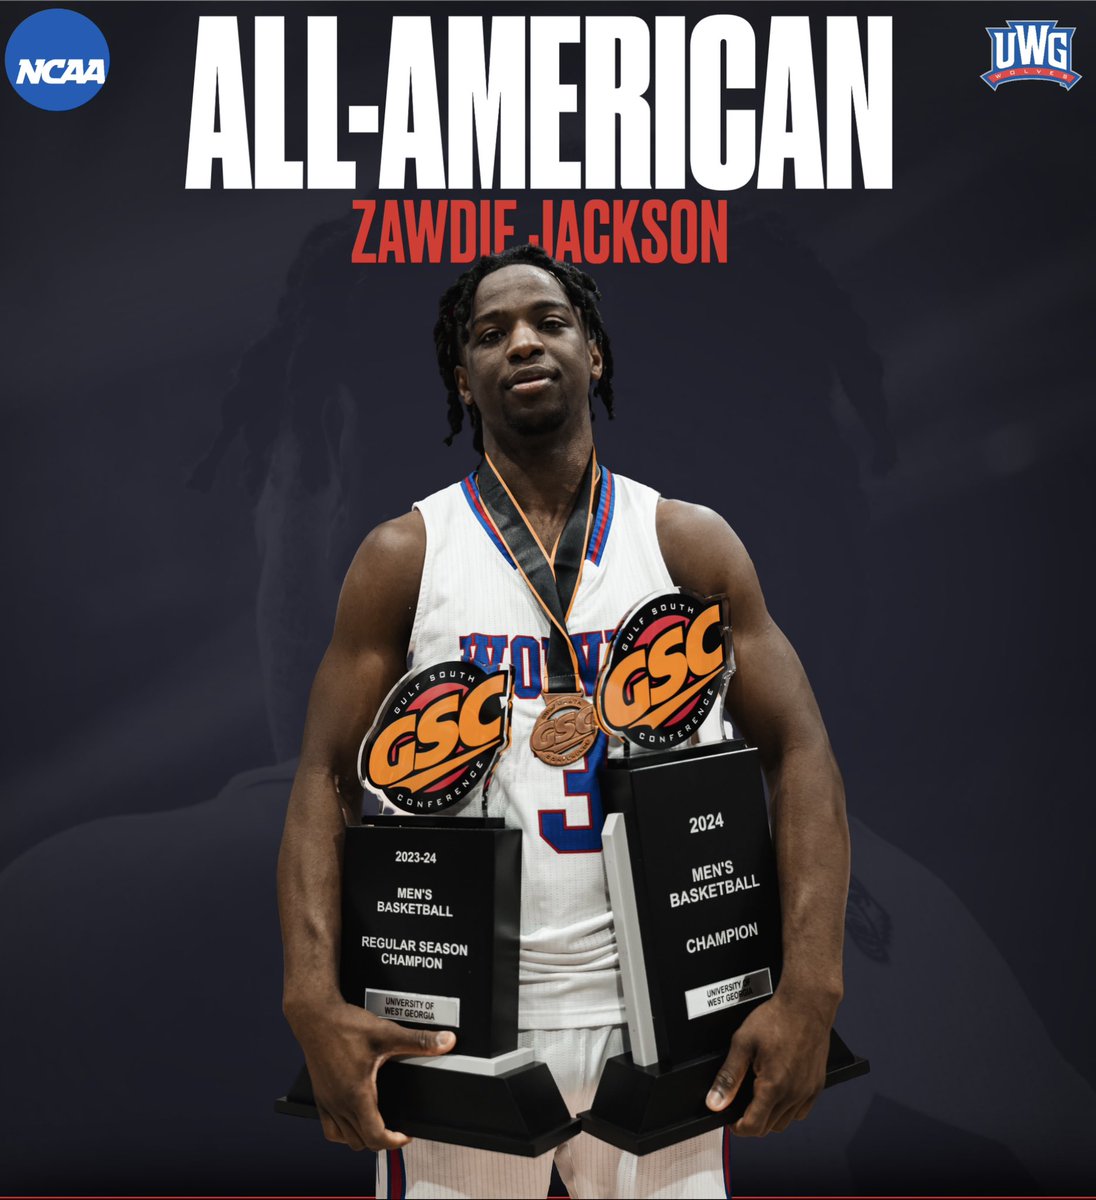 Introducing the FOURTH First Team All-American in UWG Basketball History: Zawdie Jackson‼️ Major congrats to Zawdie on being named a NABC and D2CCA All-American! 👏🐺 📰: uwgathletics.com/news/2024/3/26… #WeRunTogether